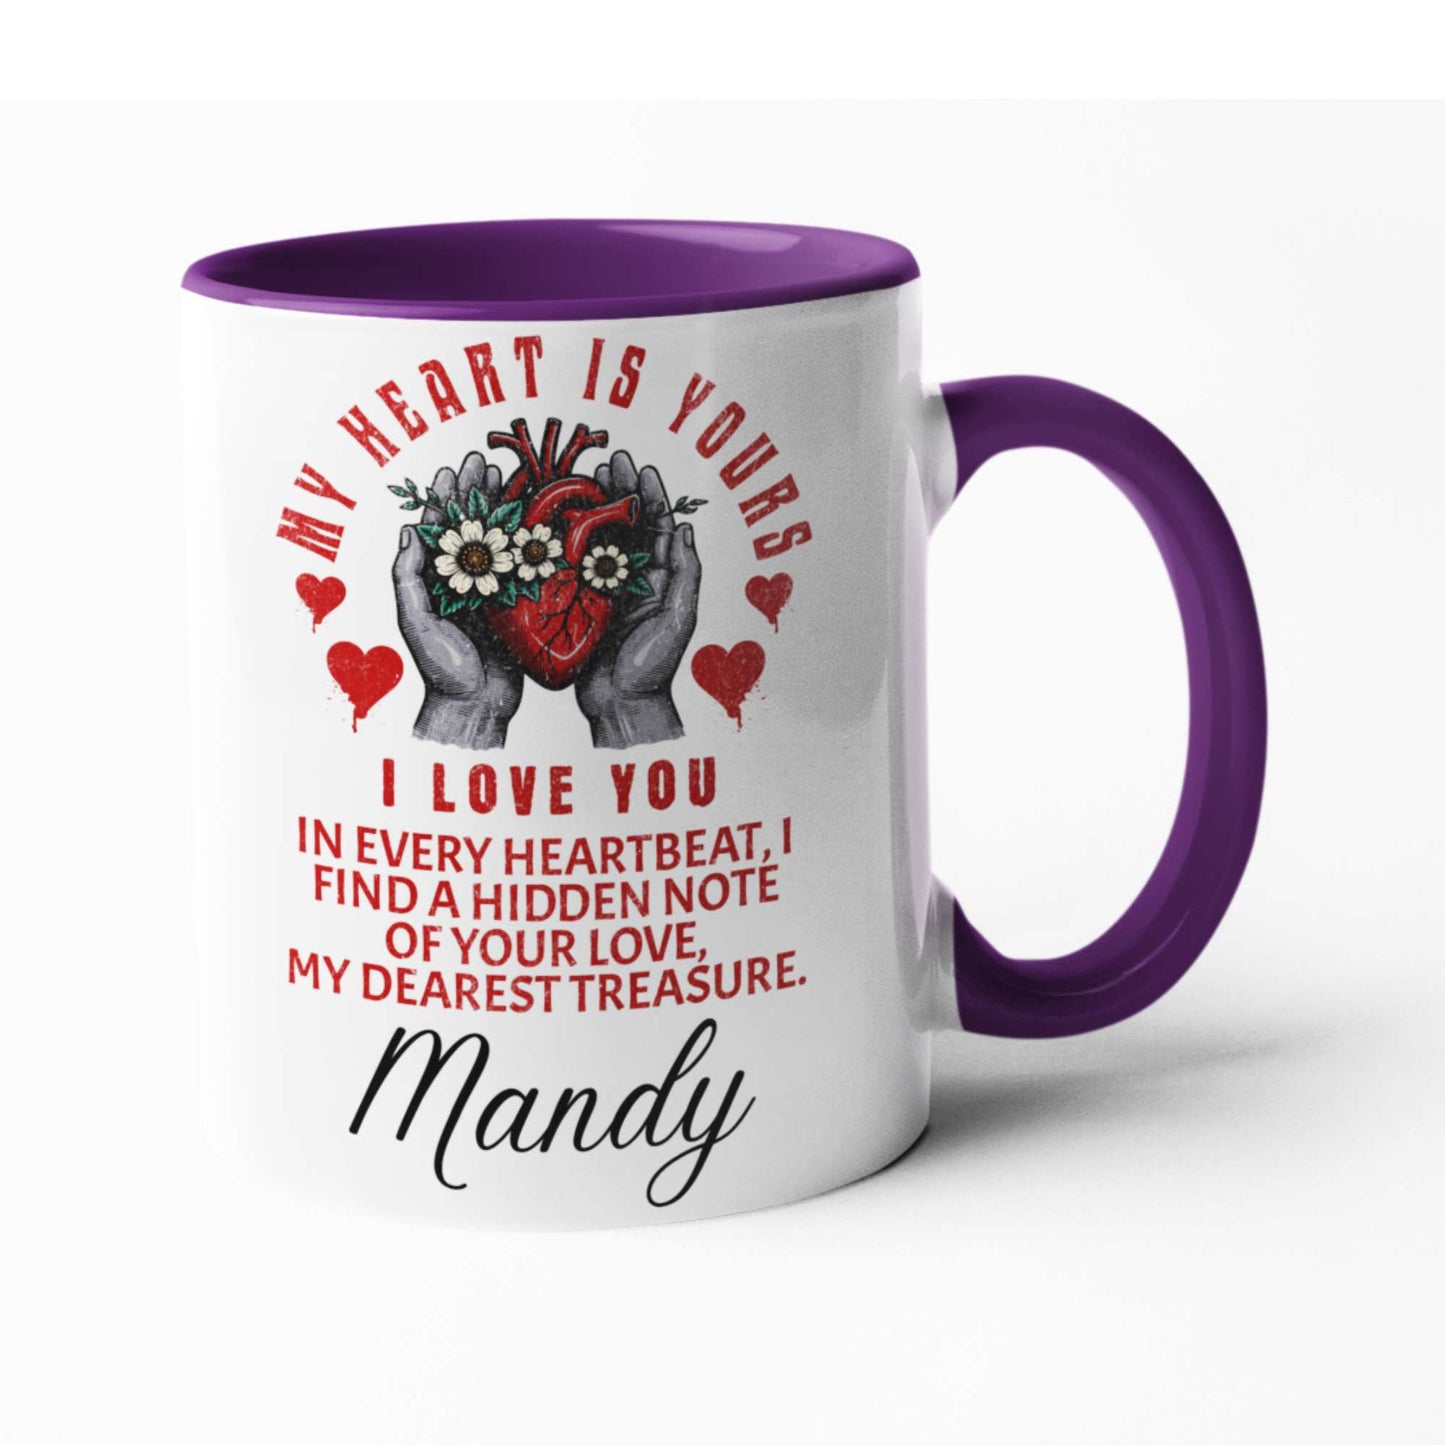 "My Heart is Yours - I Love You" Personalised Gift, Romantic Mug, Customisable Cup with Name, Love Note Mug